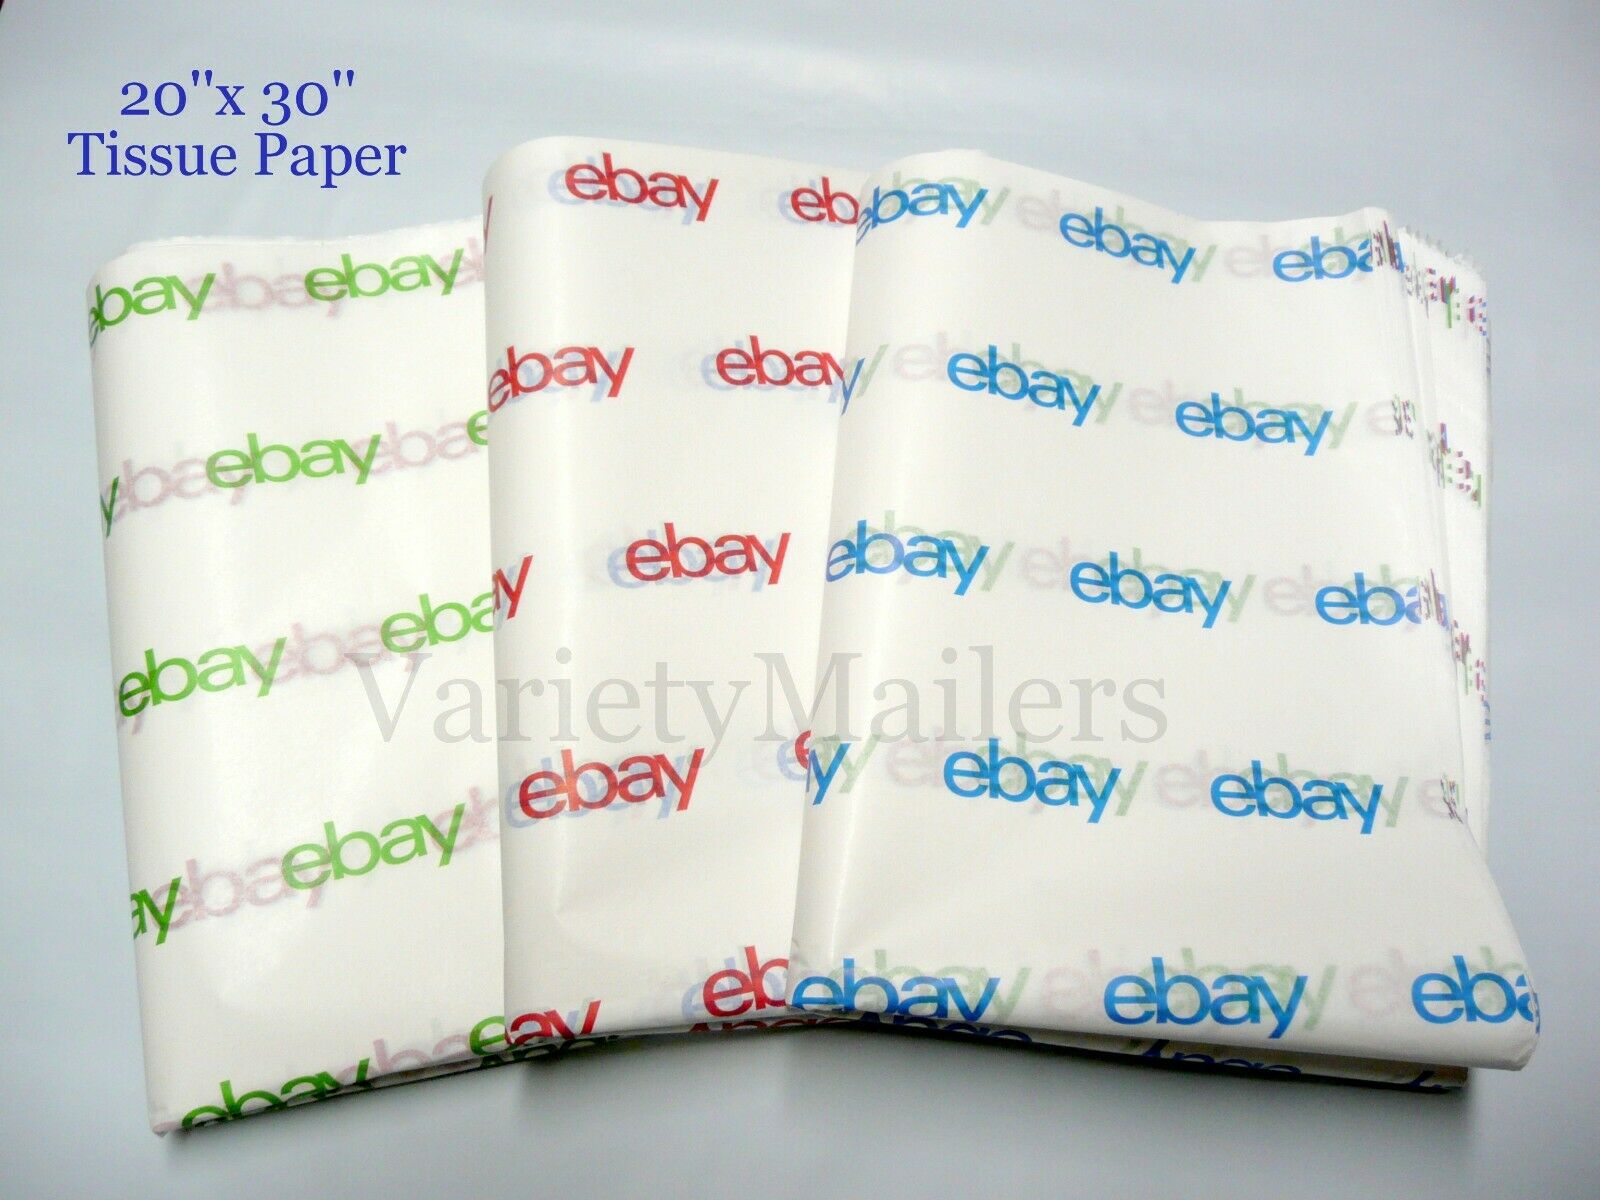 44 Large Sheets Of Ebay Branded Tissue Paper 20x30 ~ Red, Blue & Green